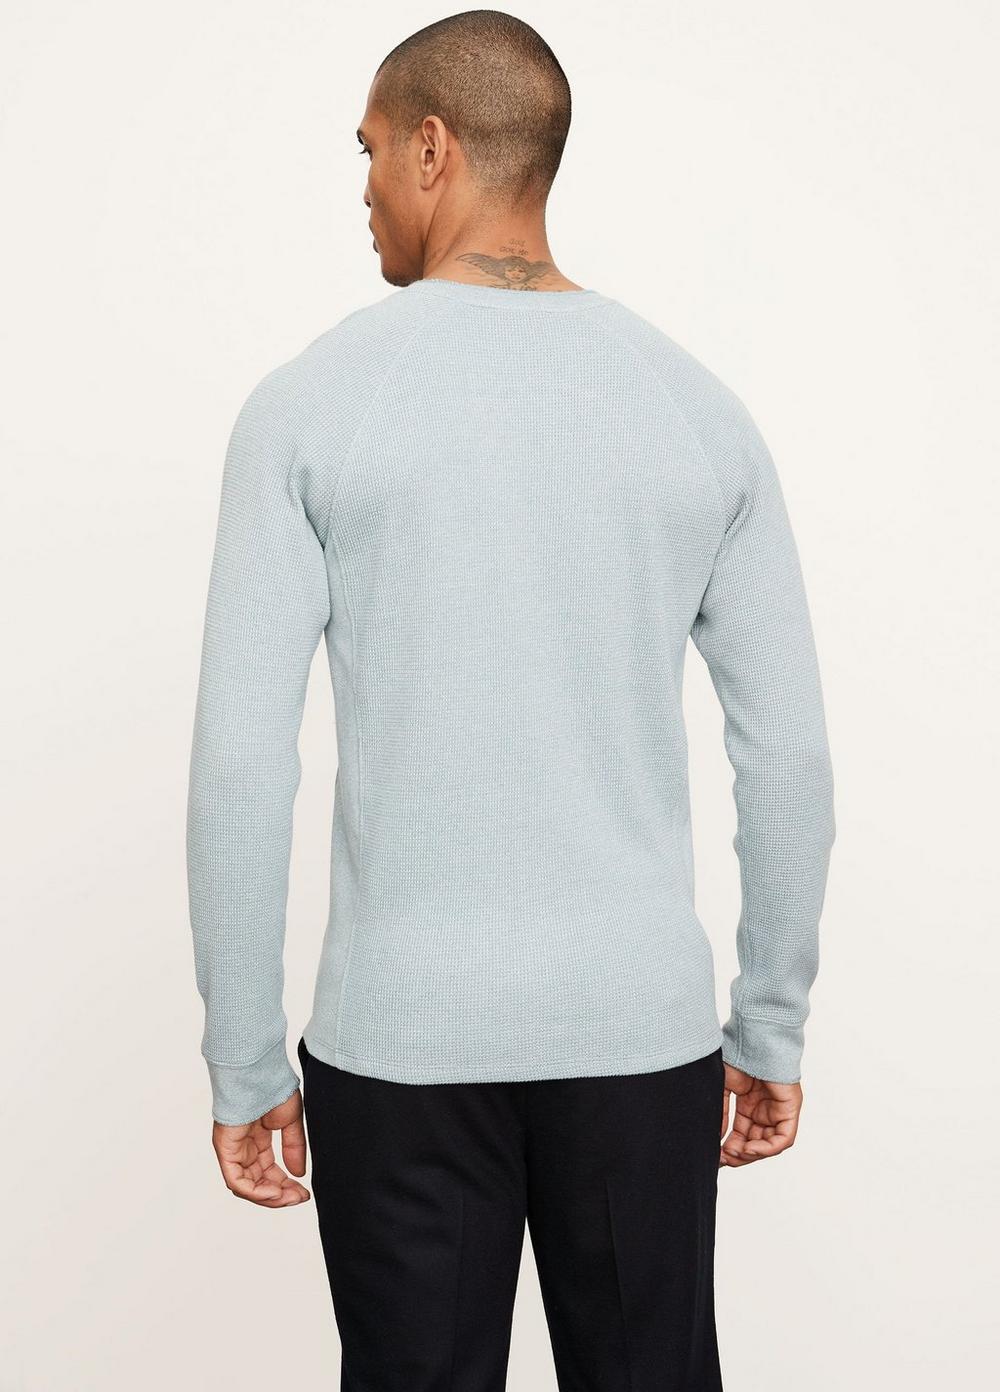 Mouline Thermal Crew Neck Shirt